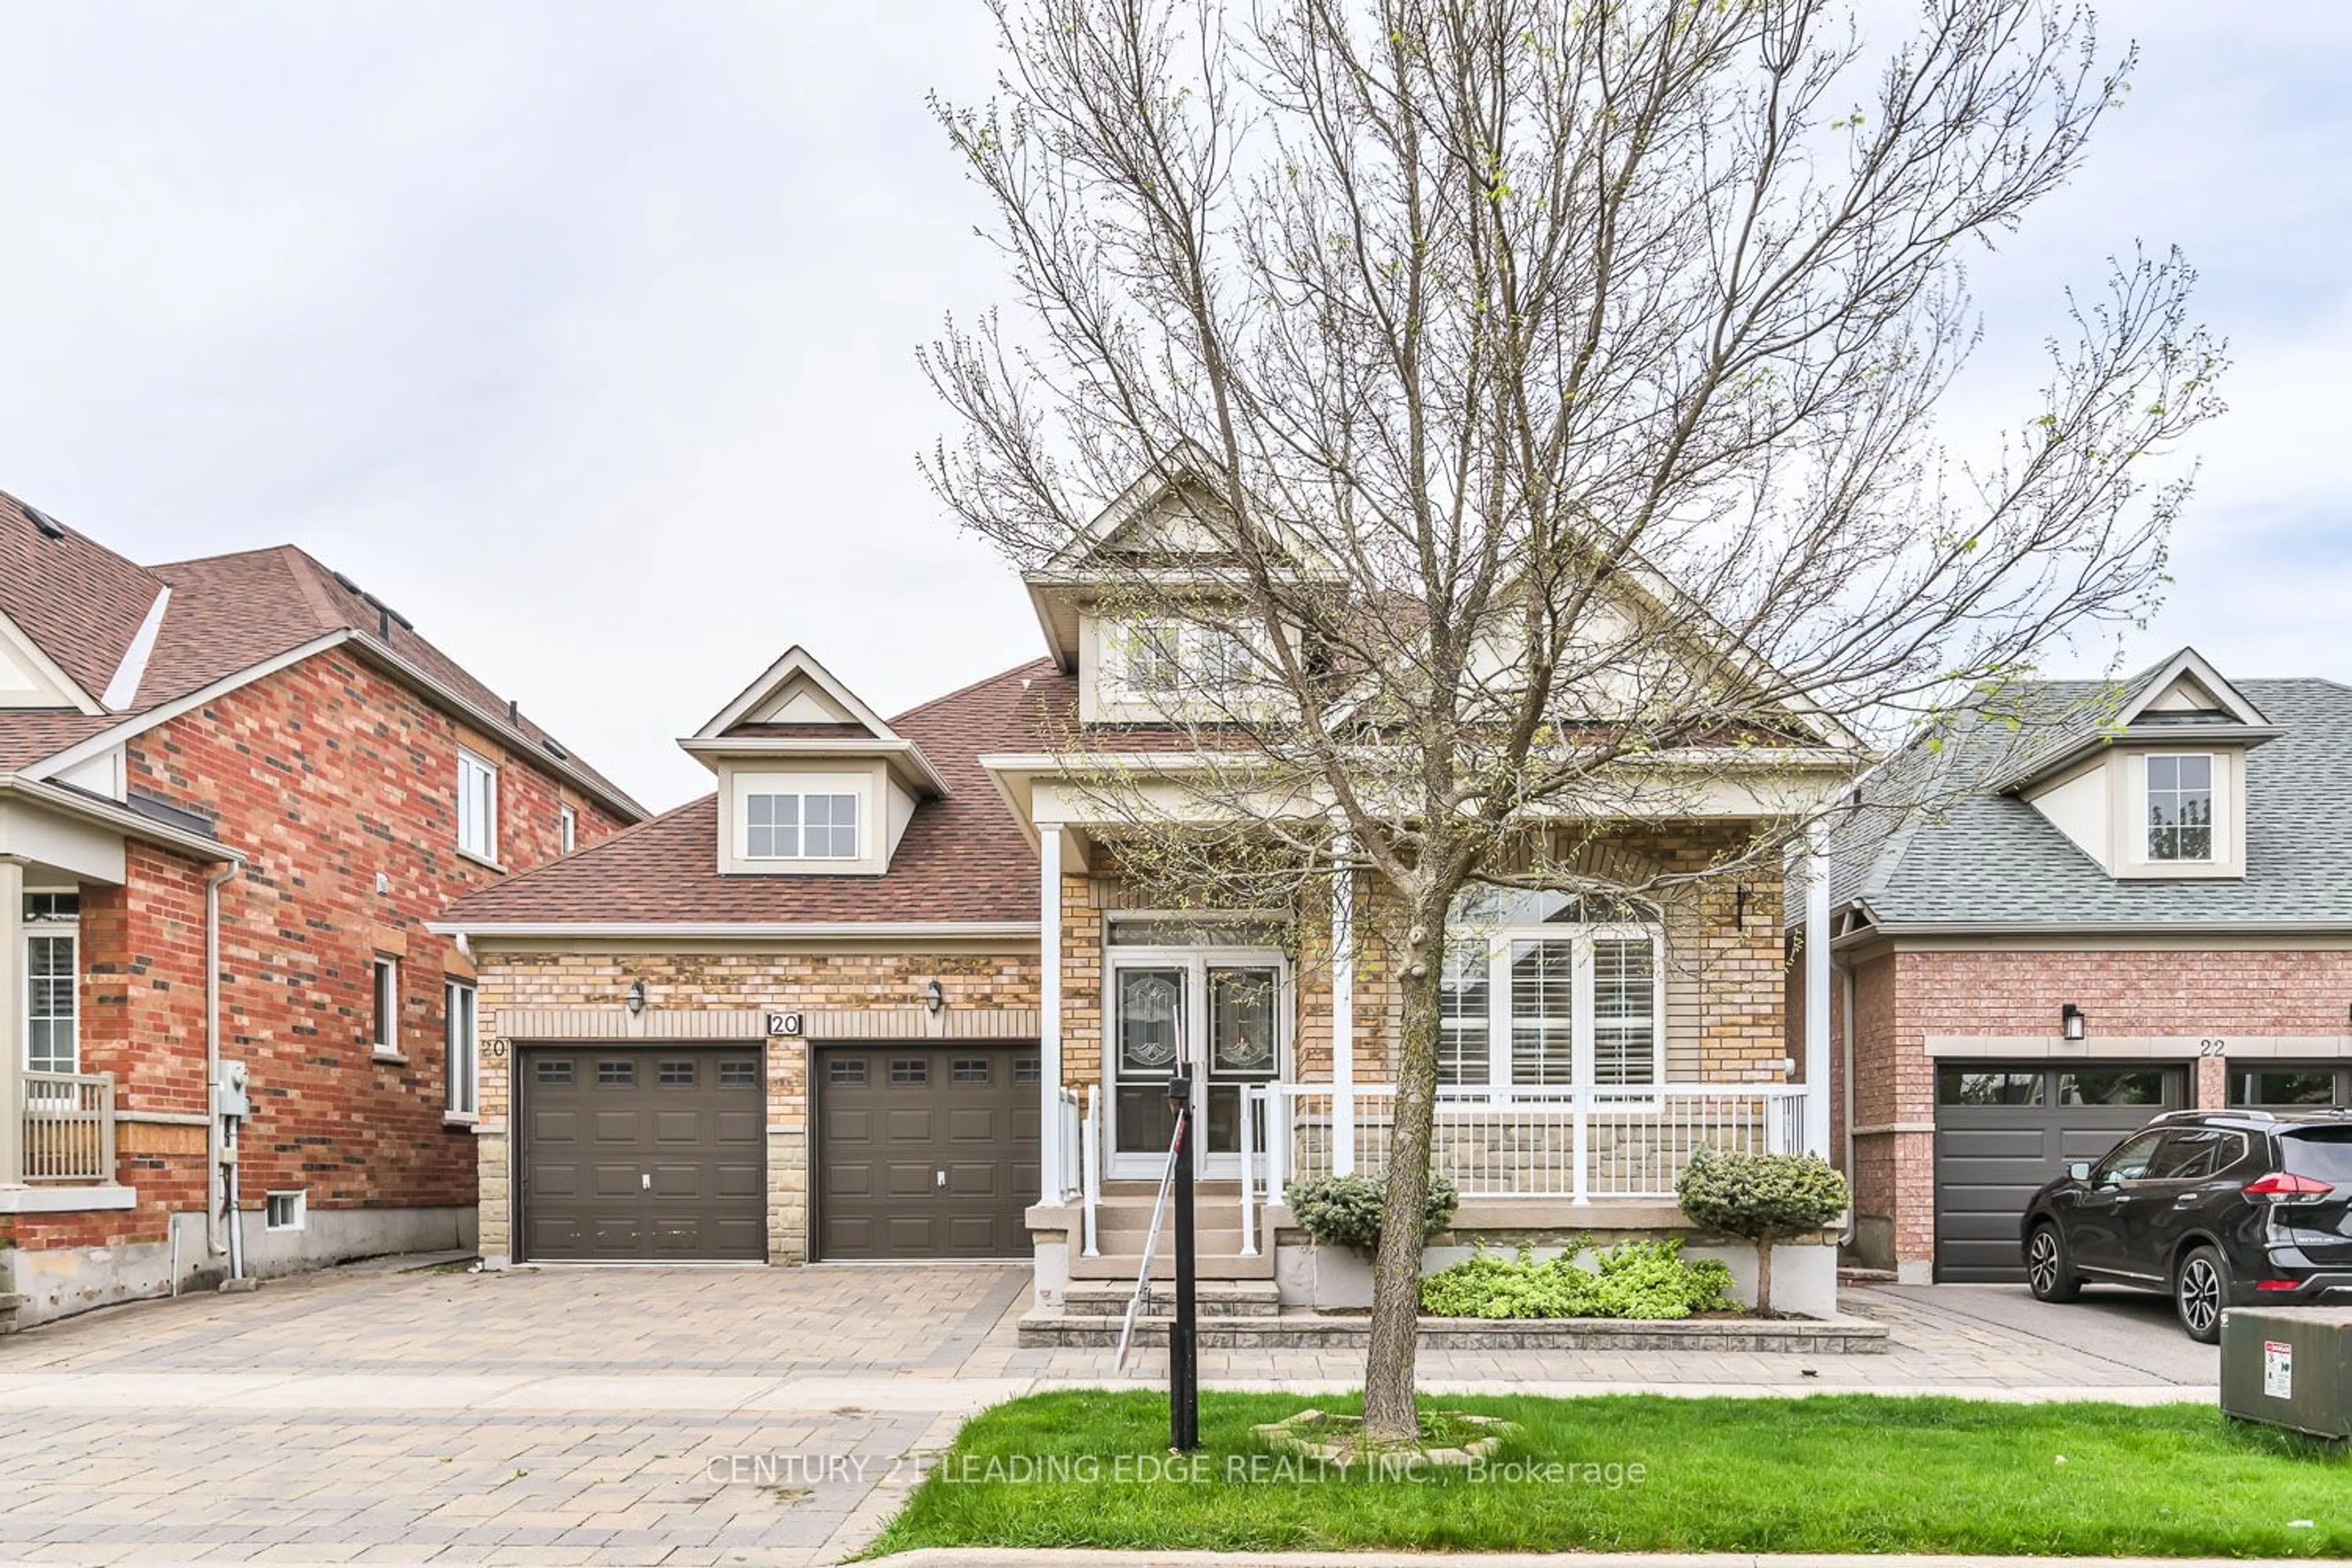 Home with brick exterior material for 20 Victoria Wood Ave, Markham Ontario L6E 1K6